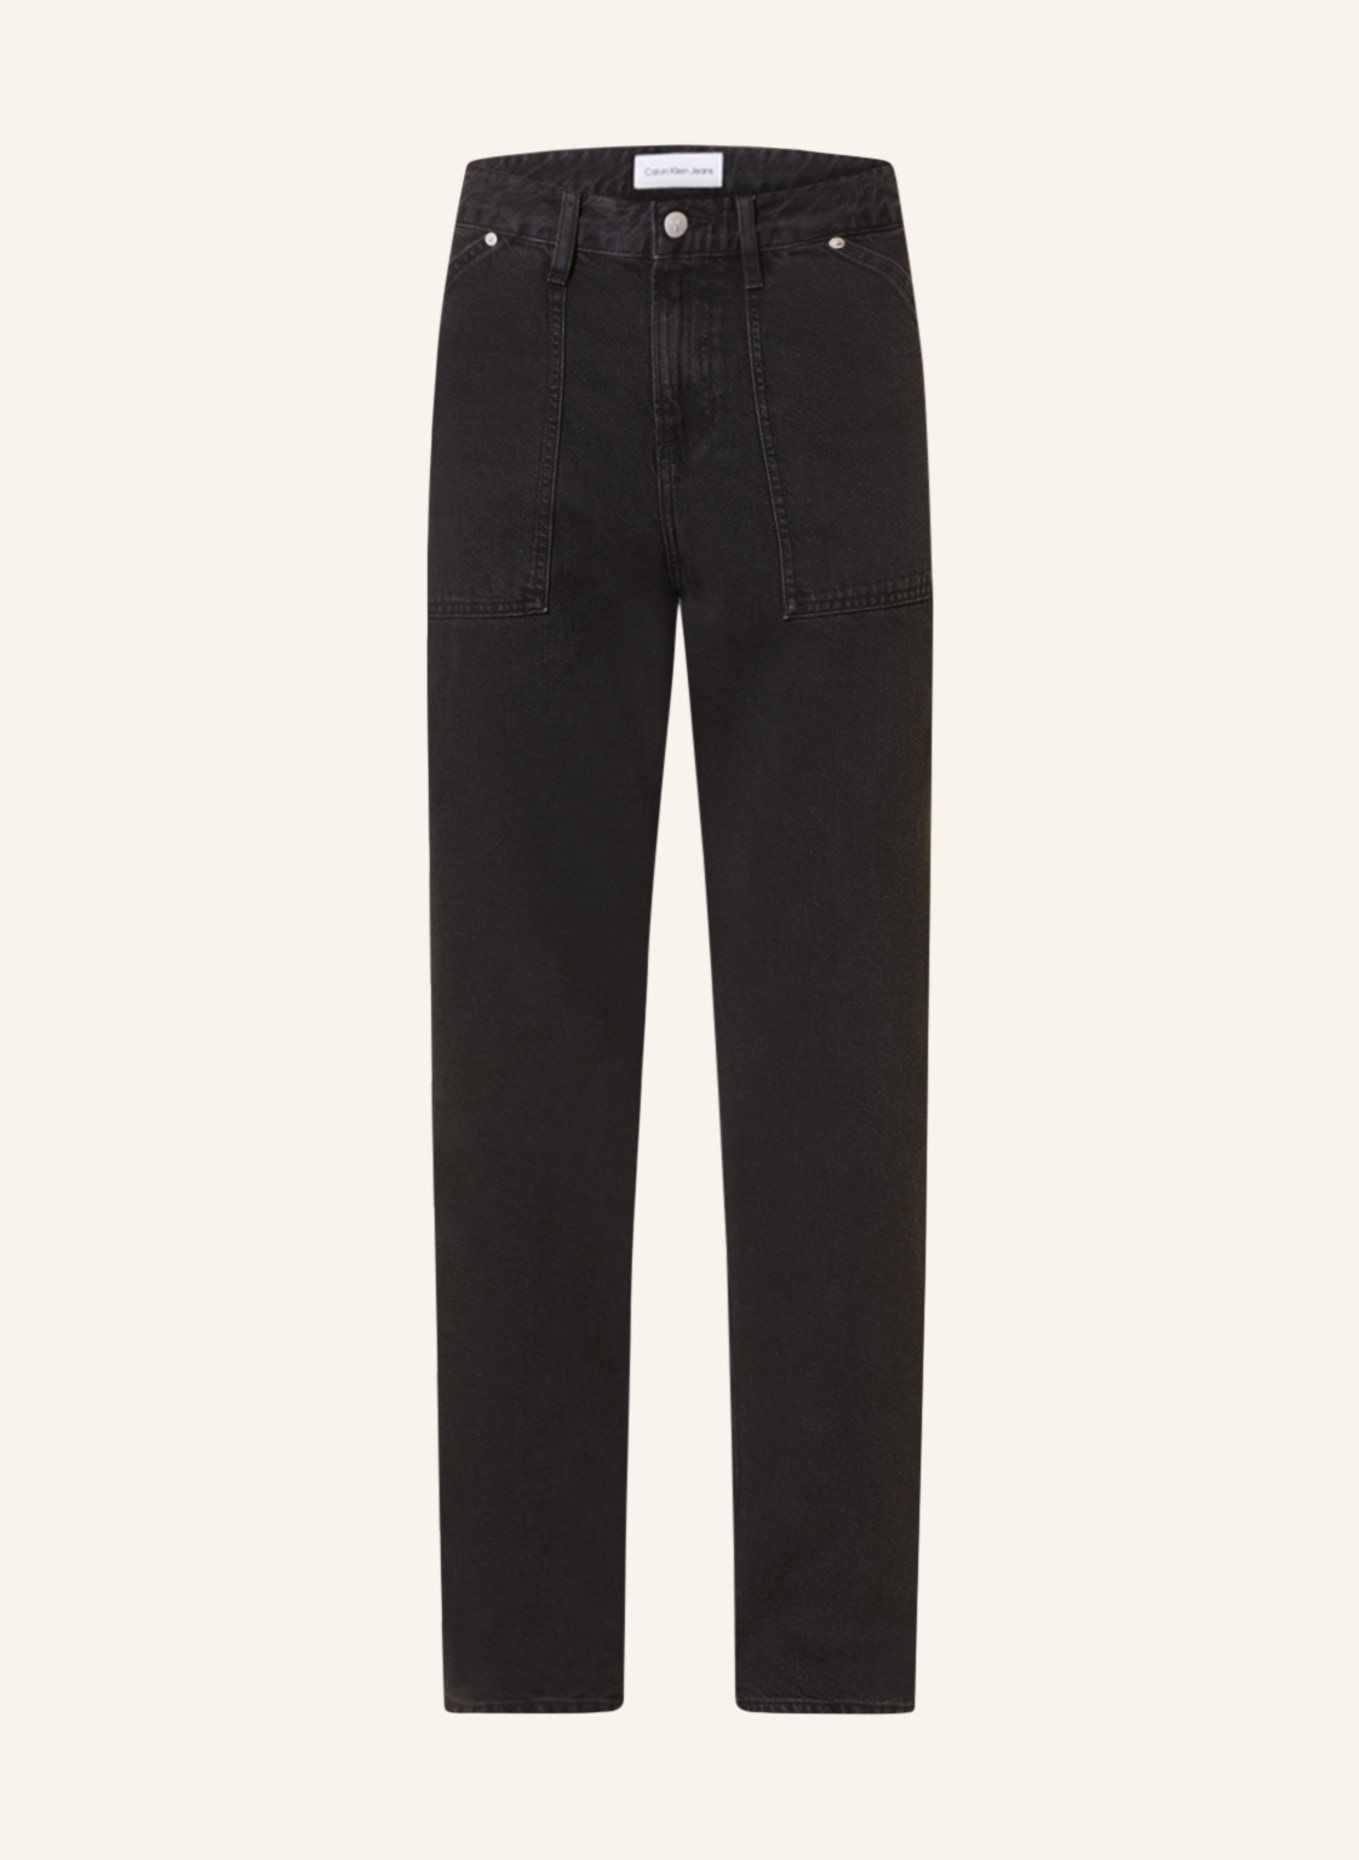 Calvin Klein Jeans Jeans 90S STRAIGHT Relaxed Fit, Farbe: SCHWARZ (Bild 1)